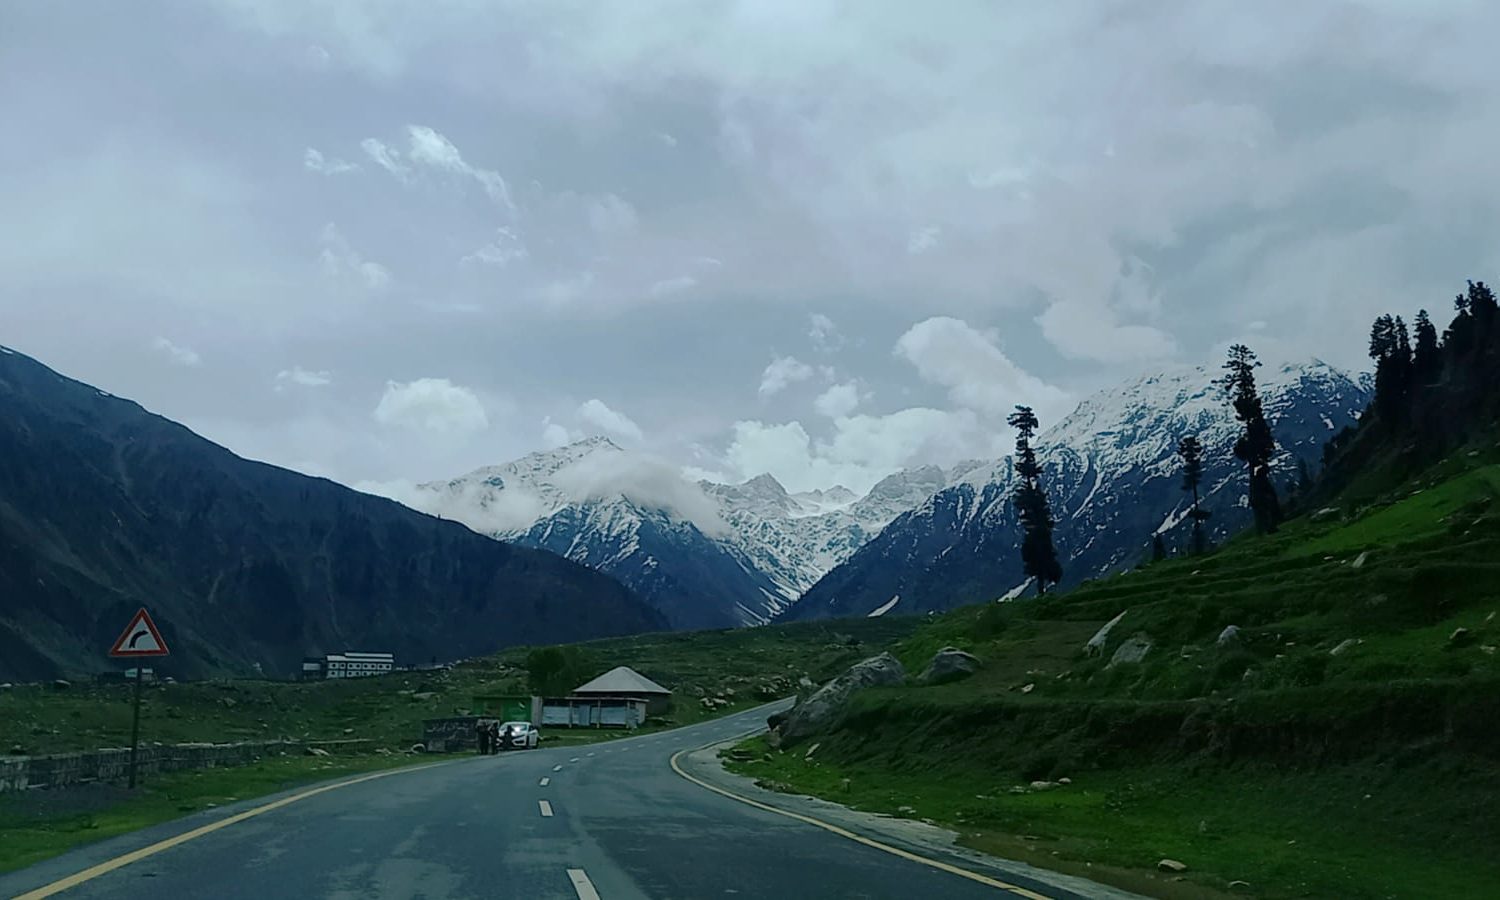 Road Leading to naran with amazing scenery